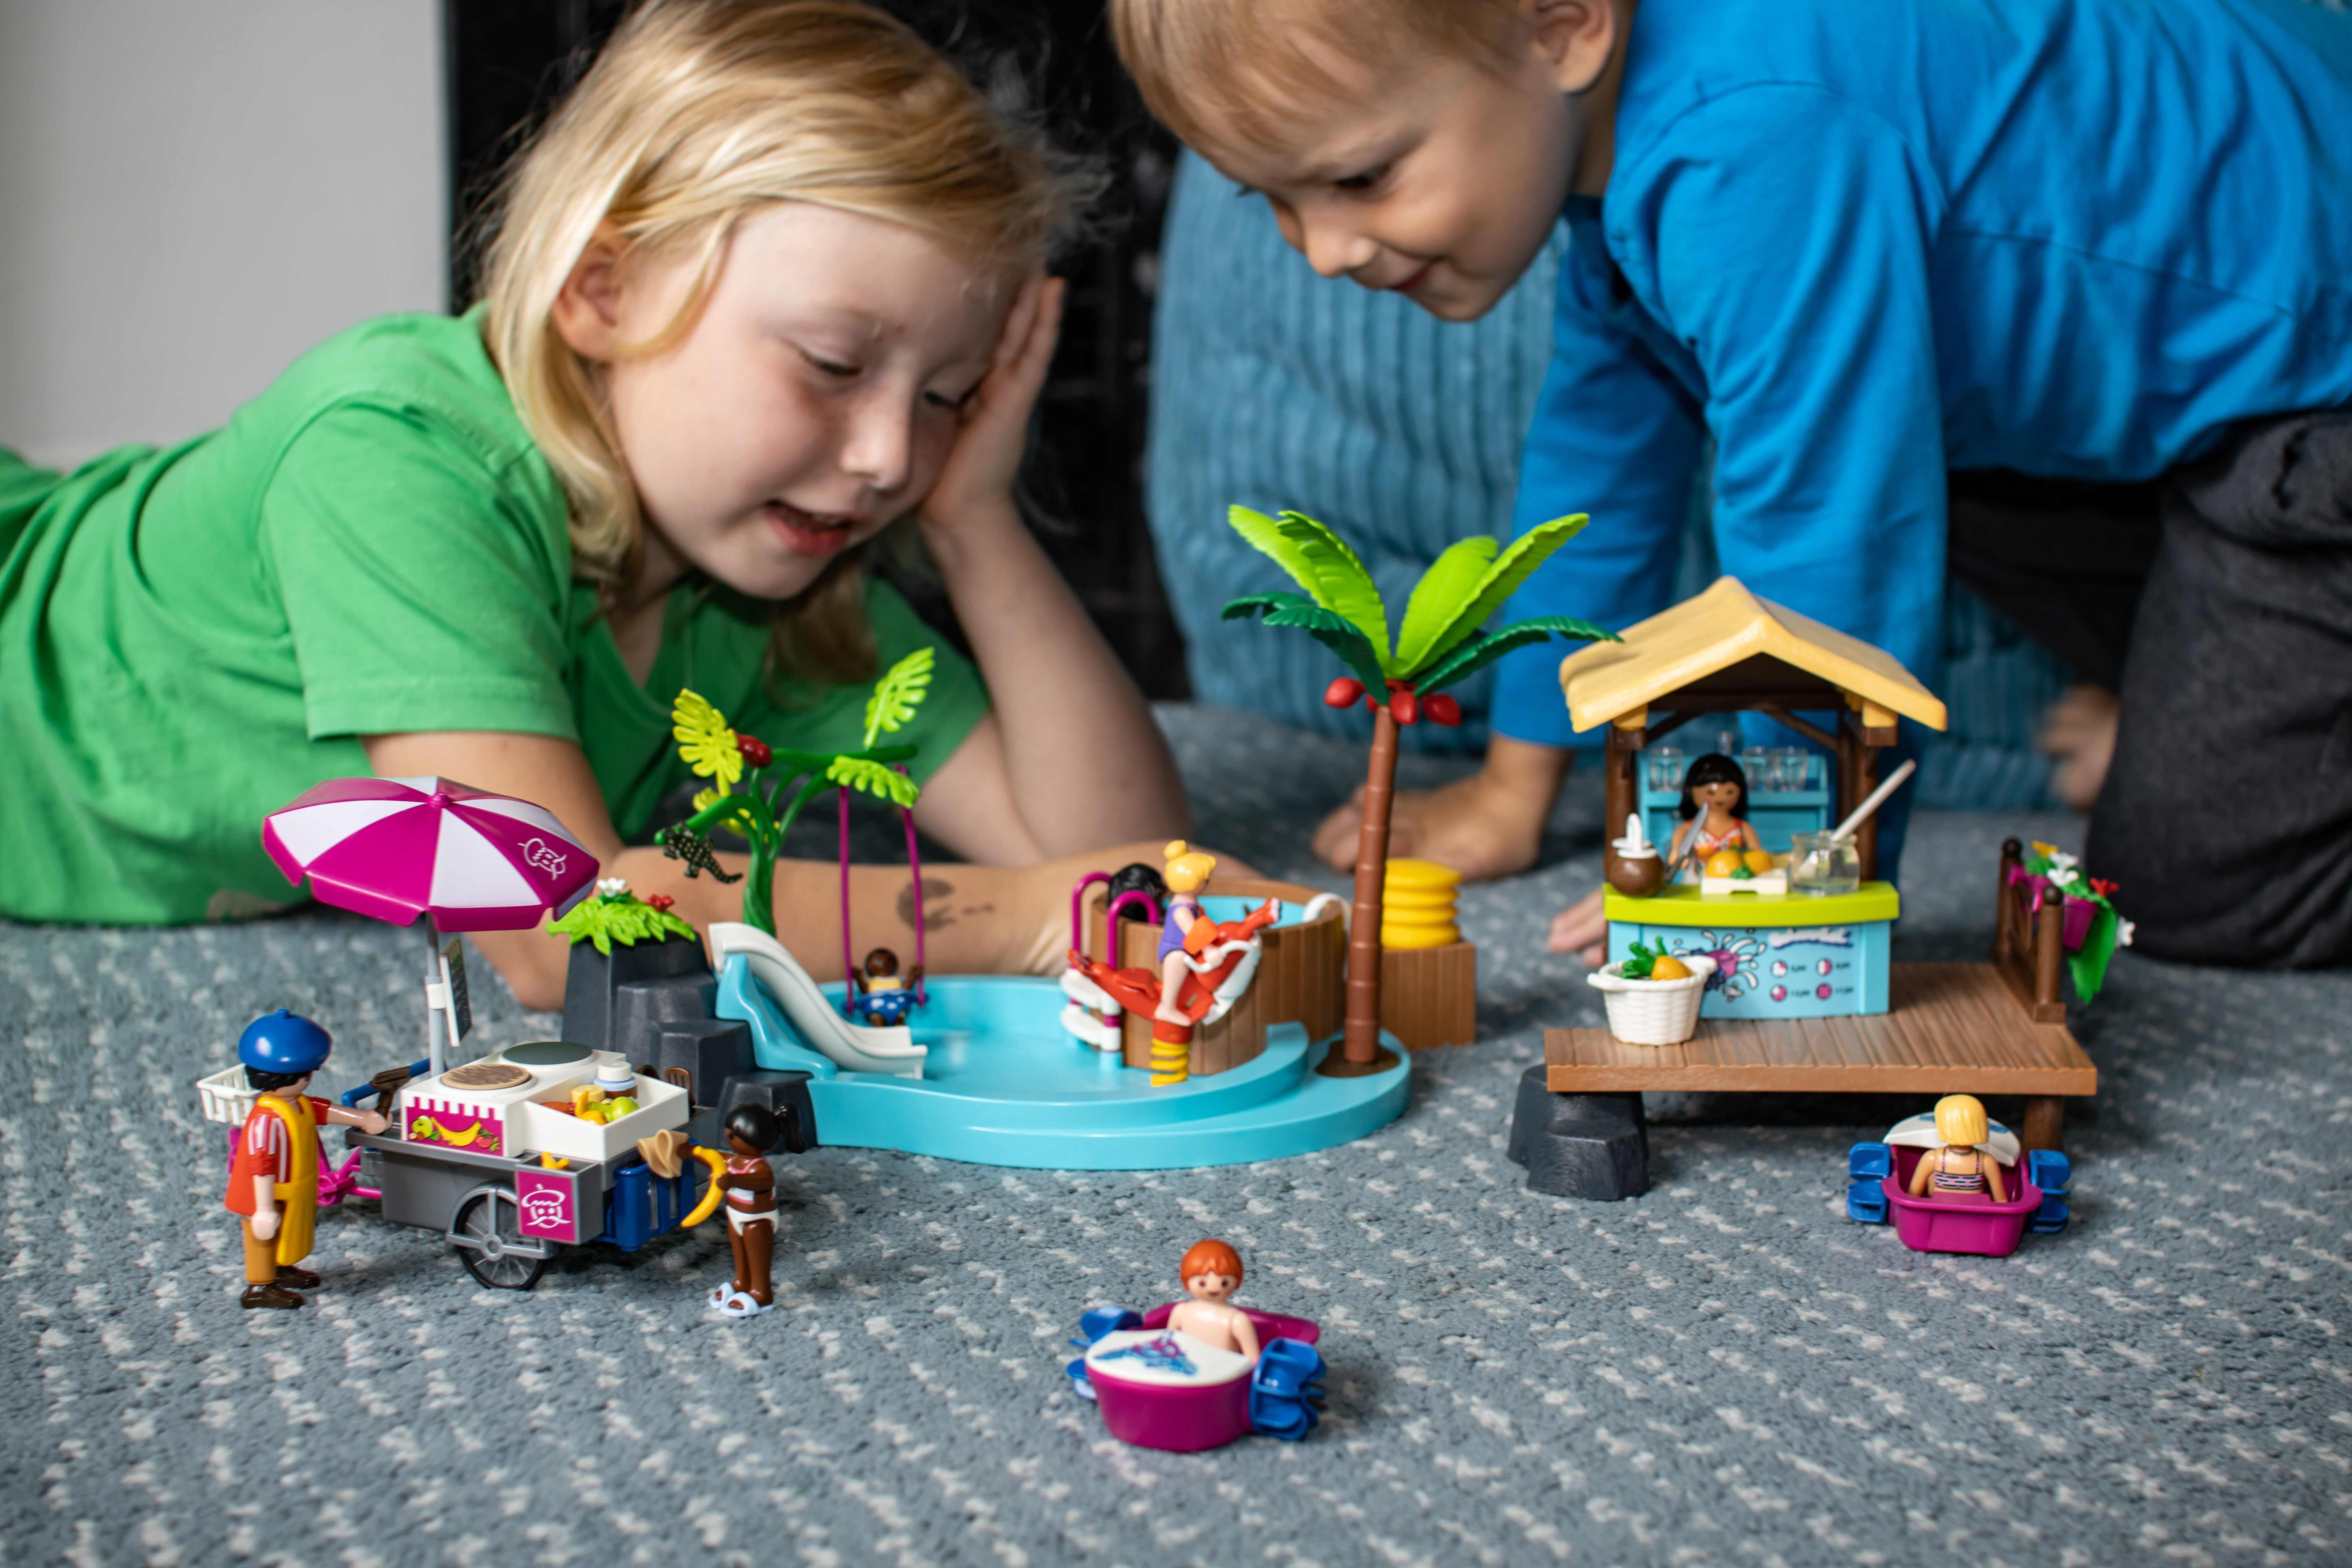 Review: Playmobil Family Fun Sets - Counting To Ten